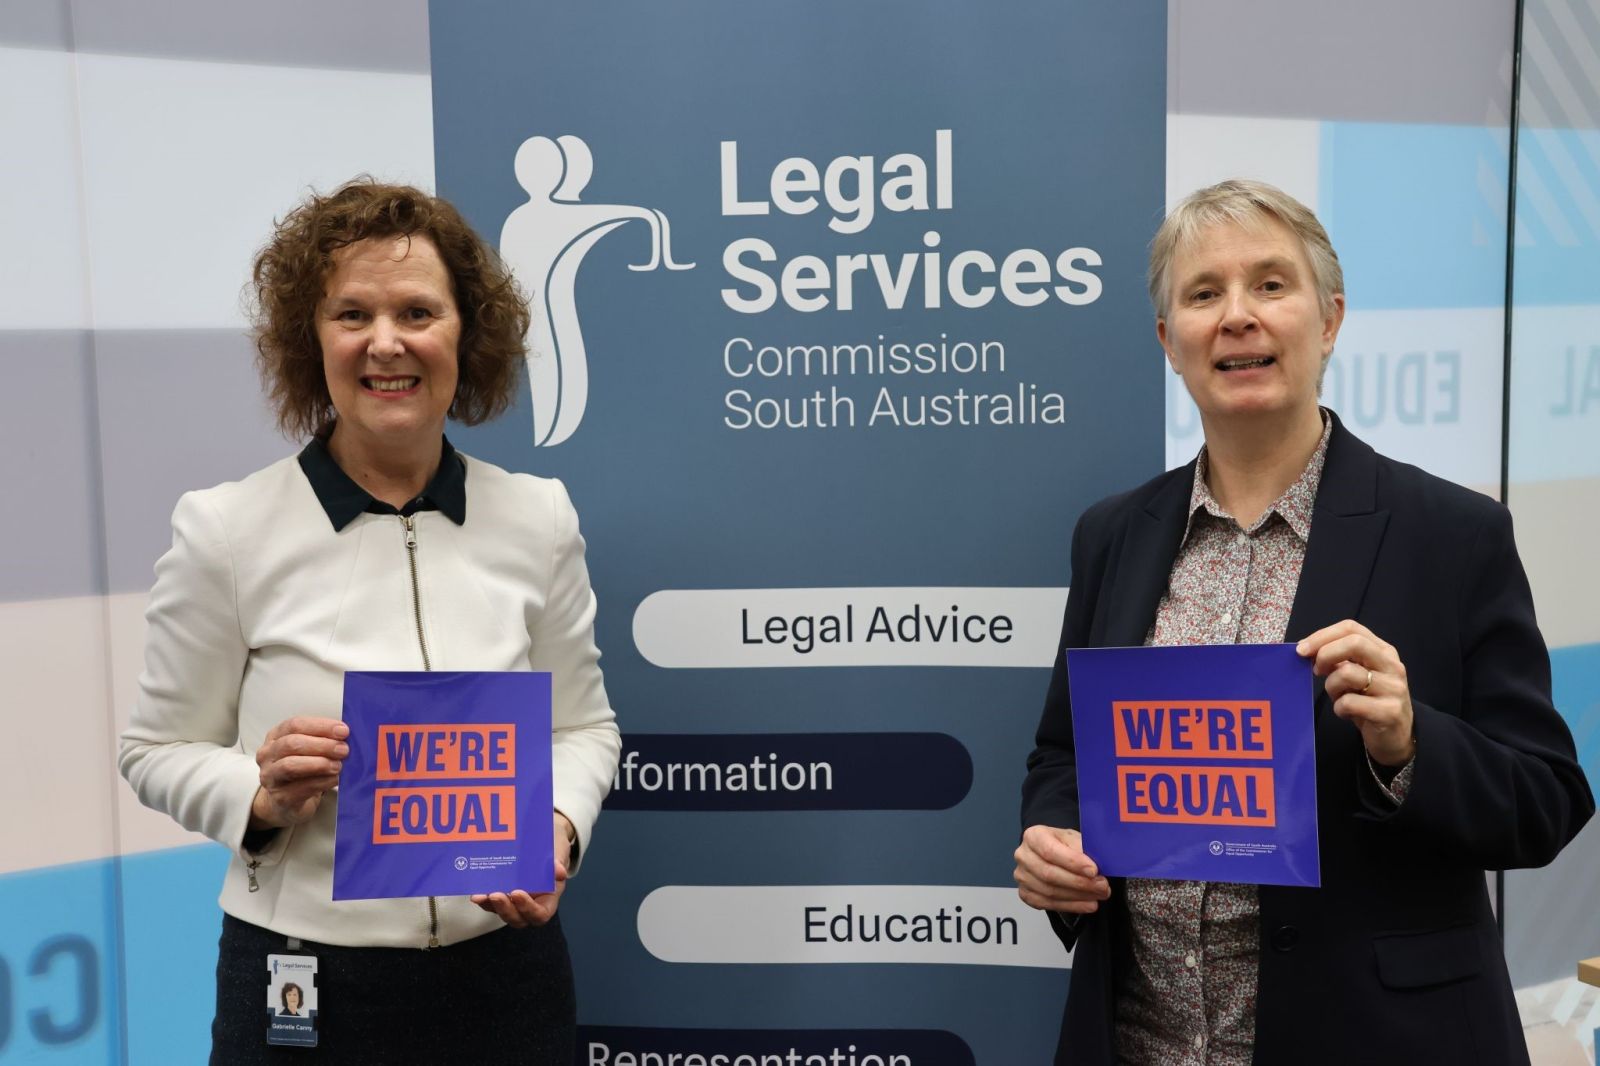 Legal Services is proud to be part of WE'RE EQUAL